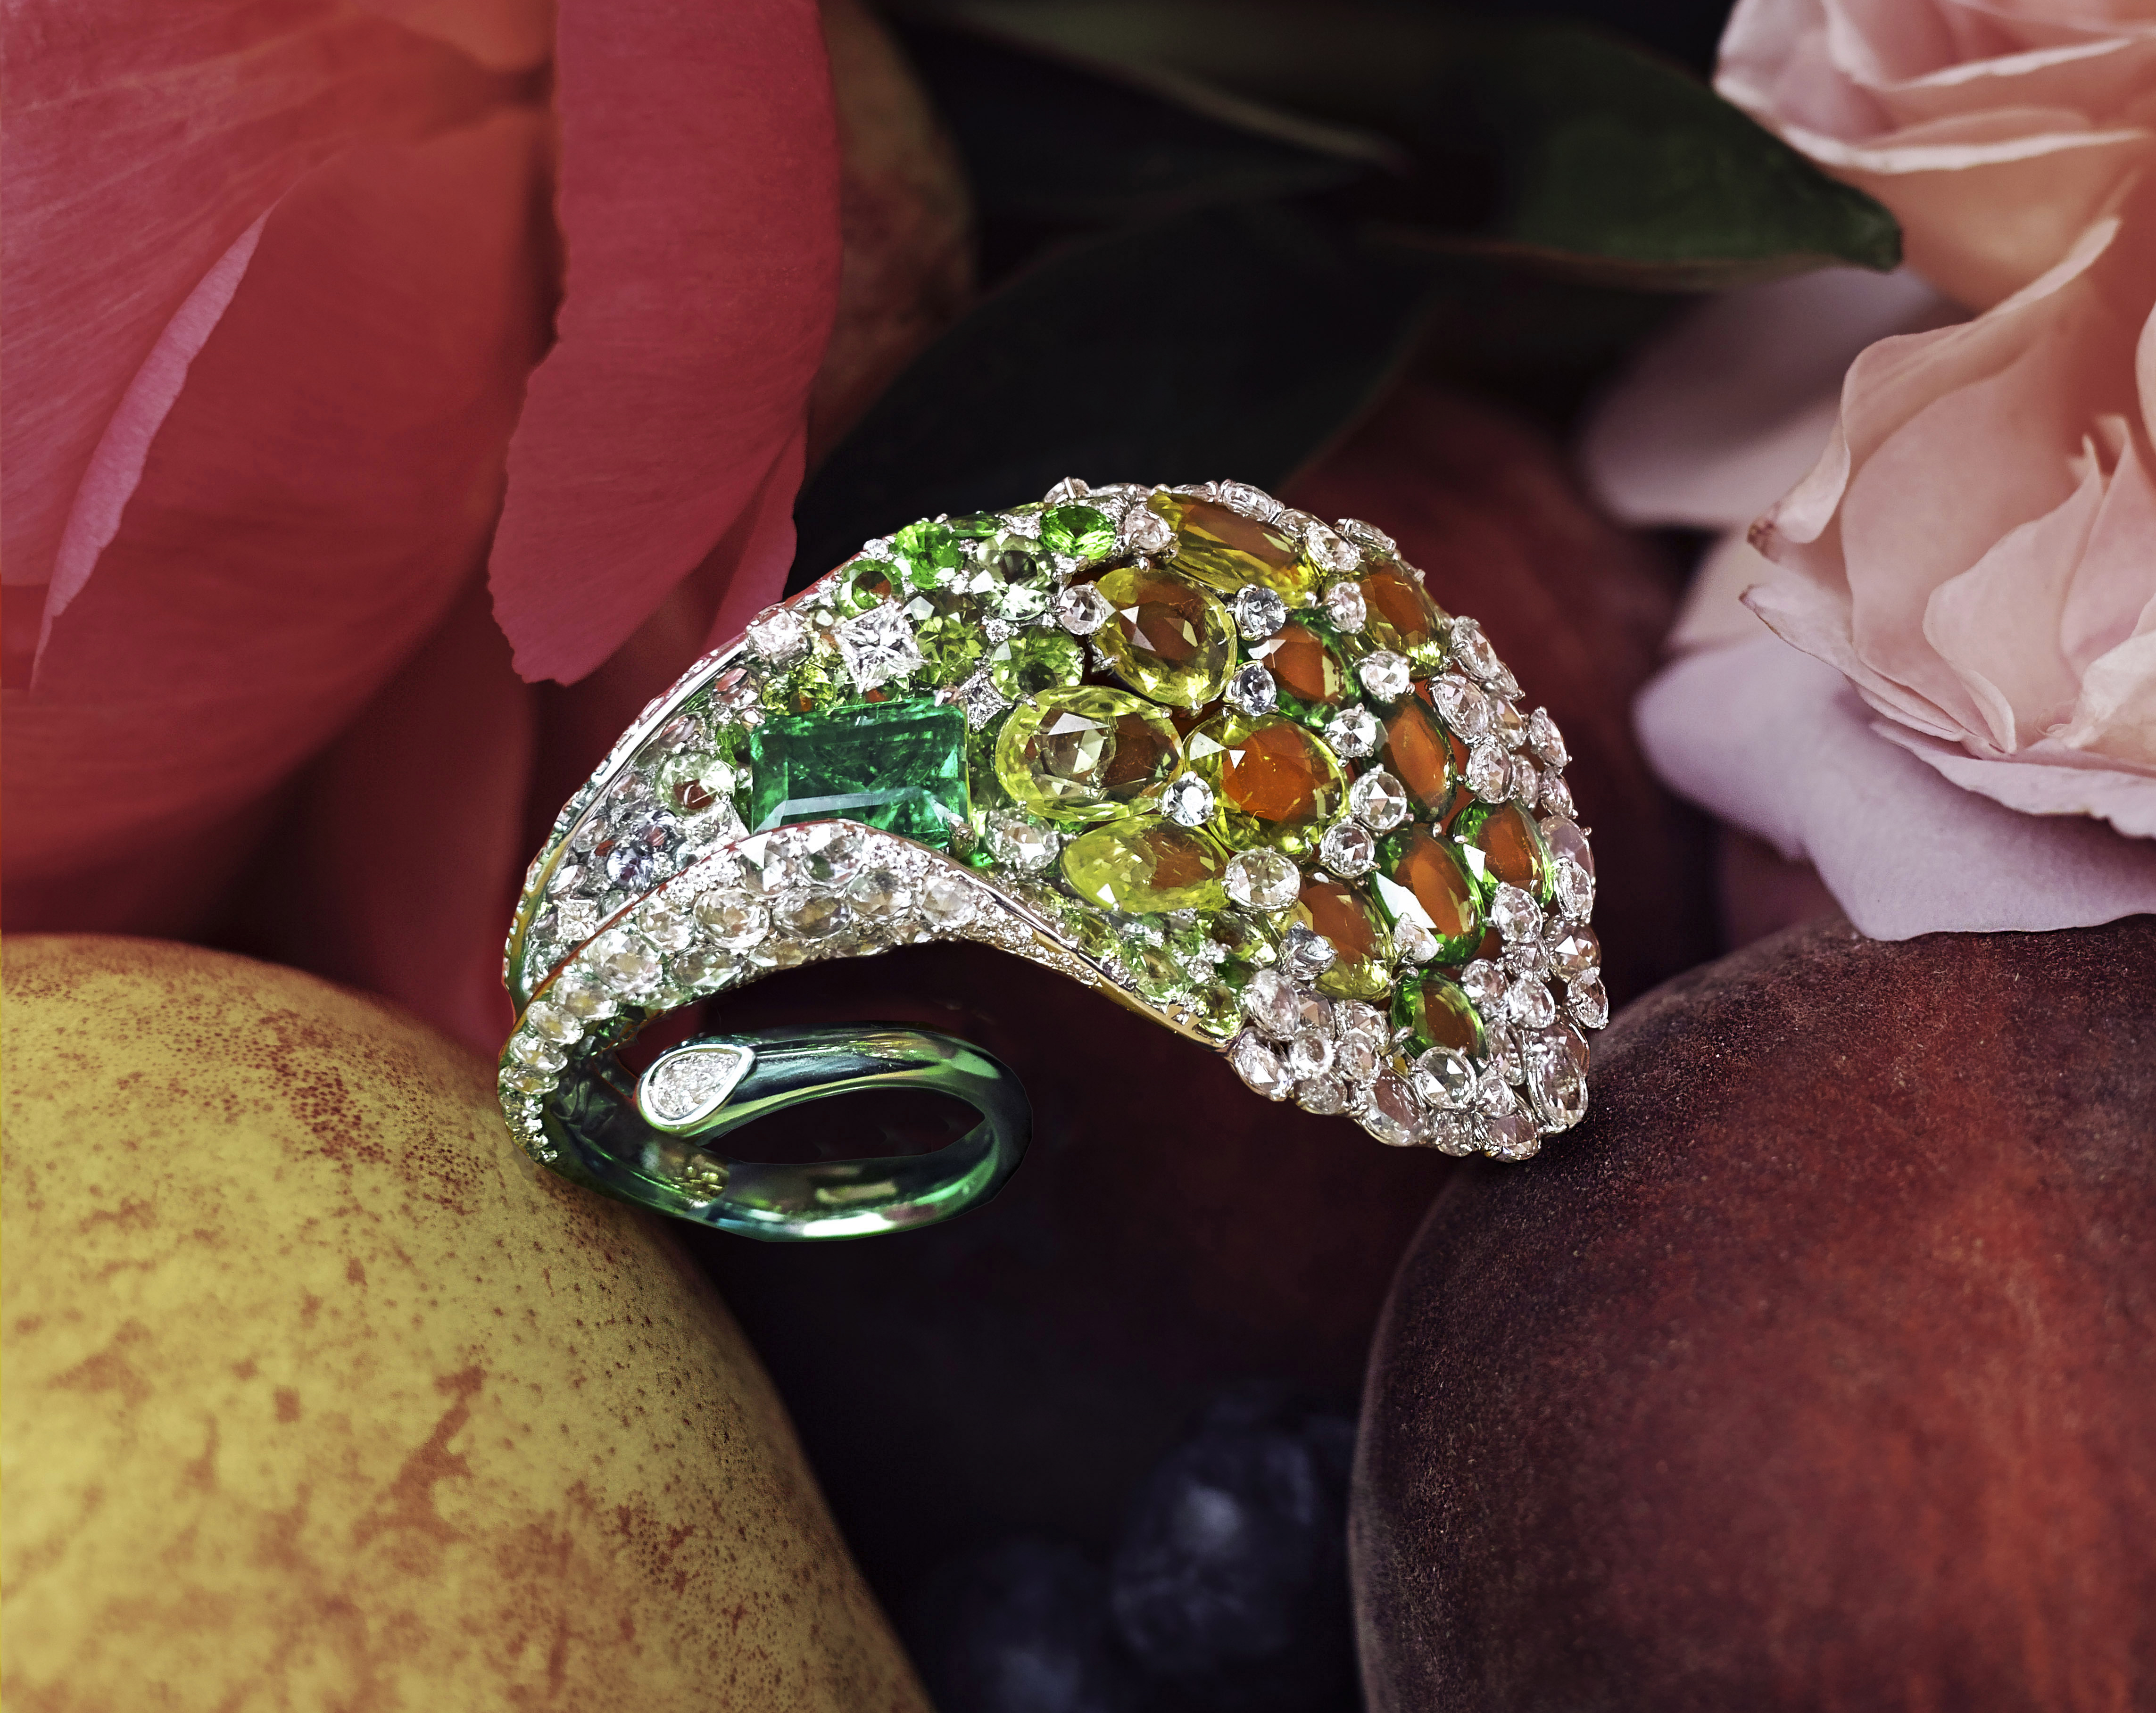 Calla Lily Ring, Emerald, Yellow Sapphires, Tsavorites, Diamonds. Part of Woman To Woman Exhibition. Image Courtesy of Feng J